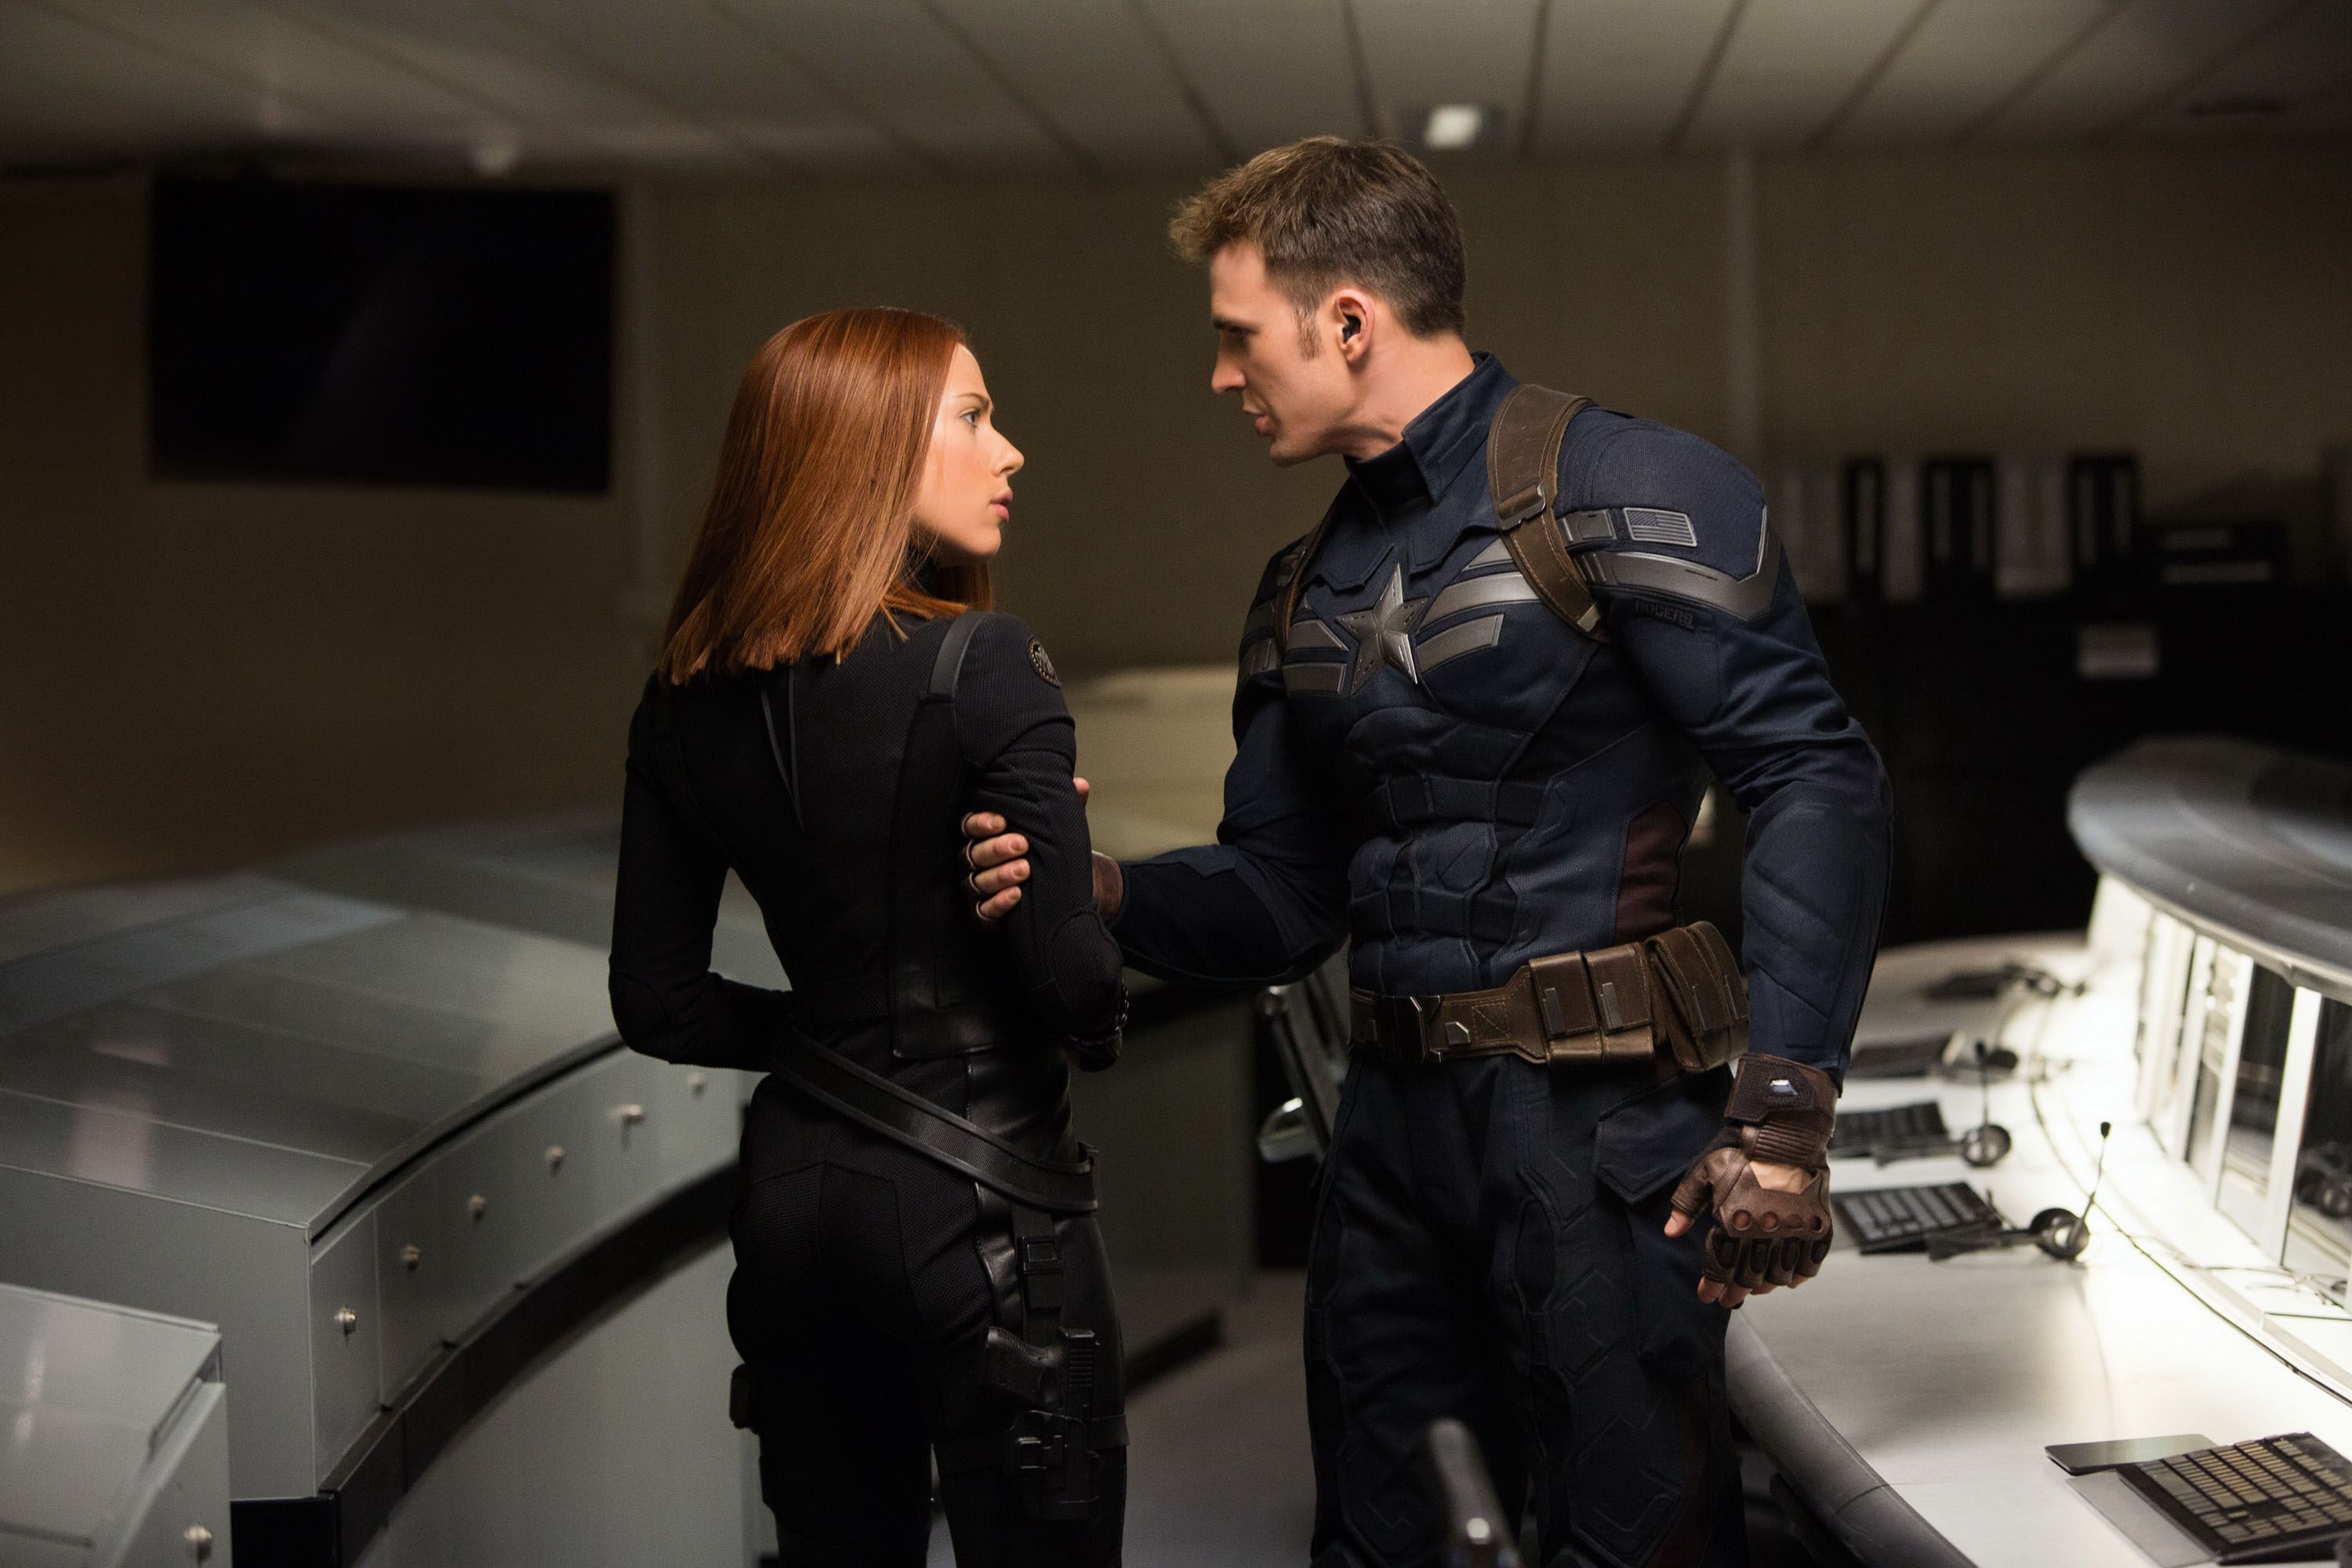 Captain America and Black Widow